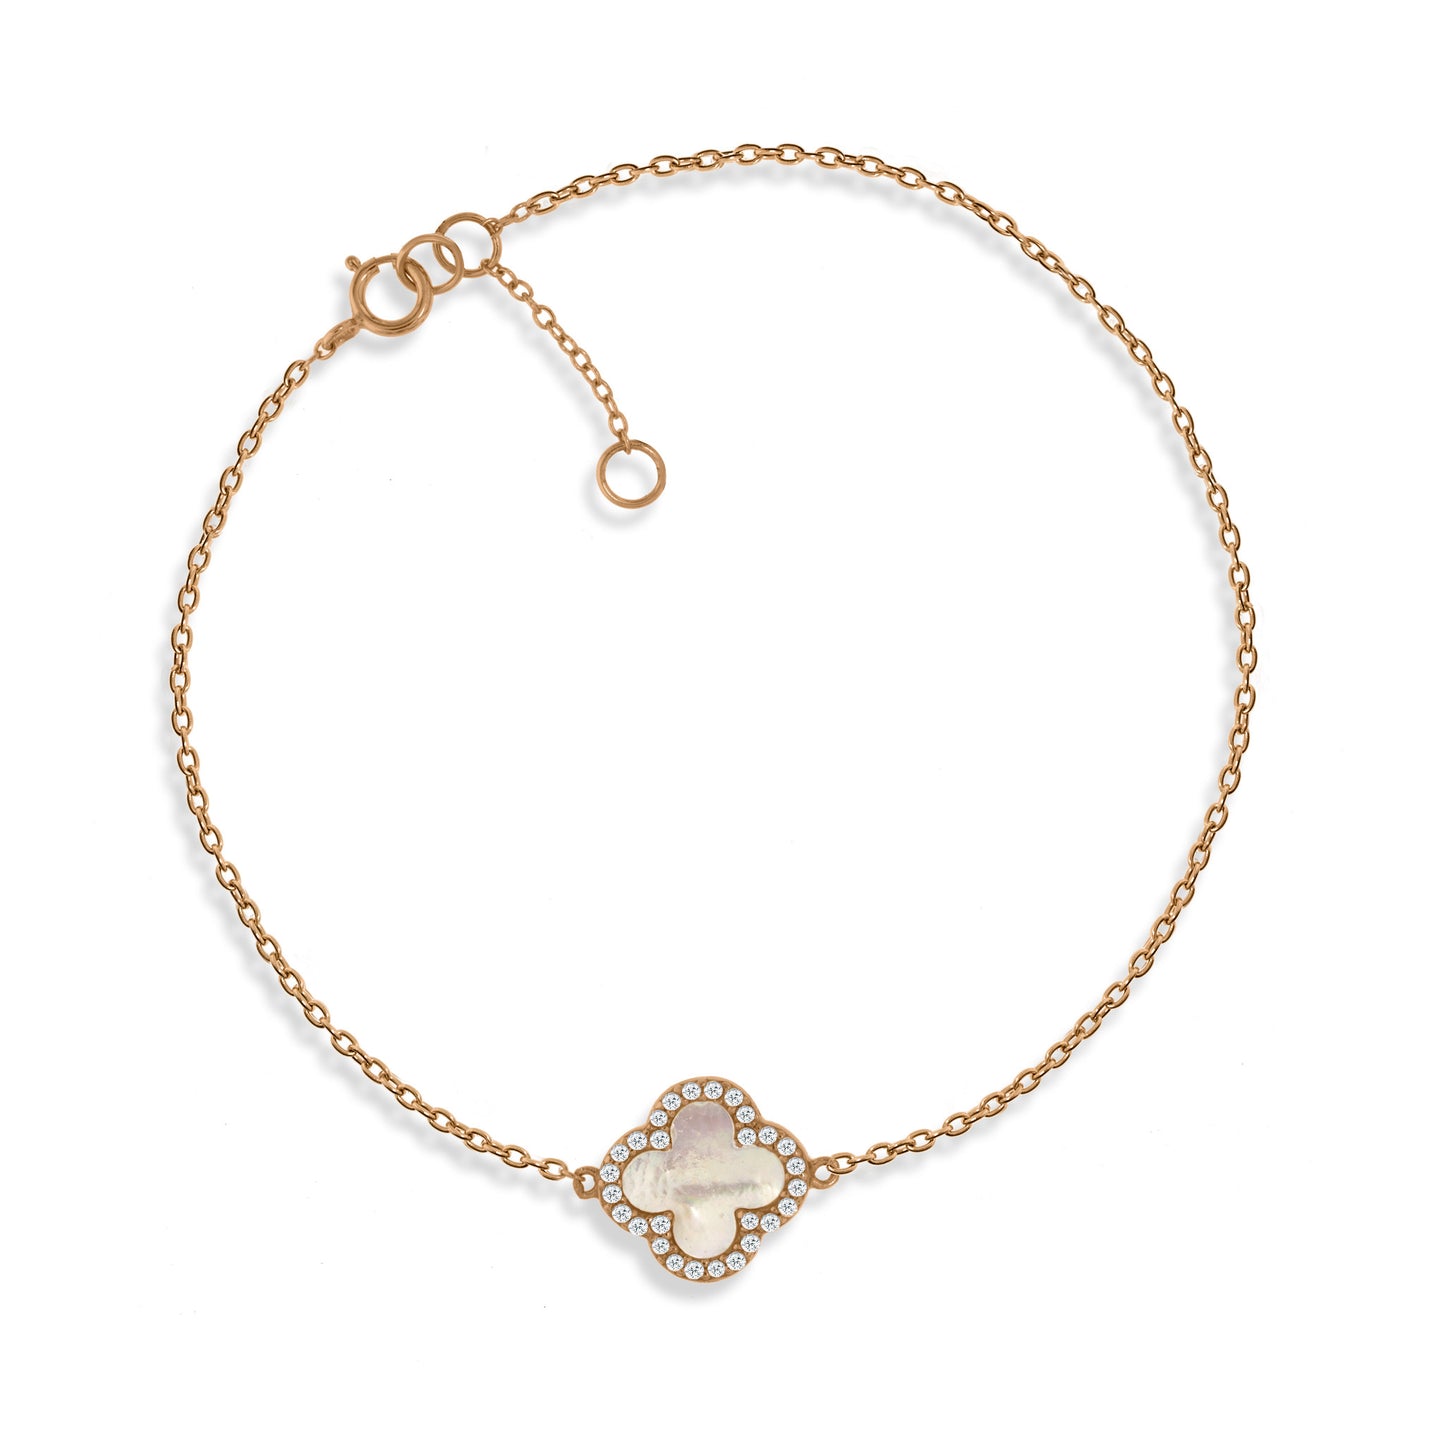 BG-5/R - Chain Bracelet with Mother of Pearl Clover Charm